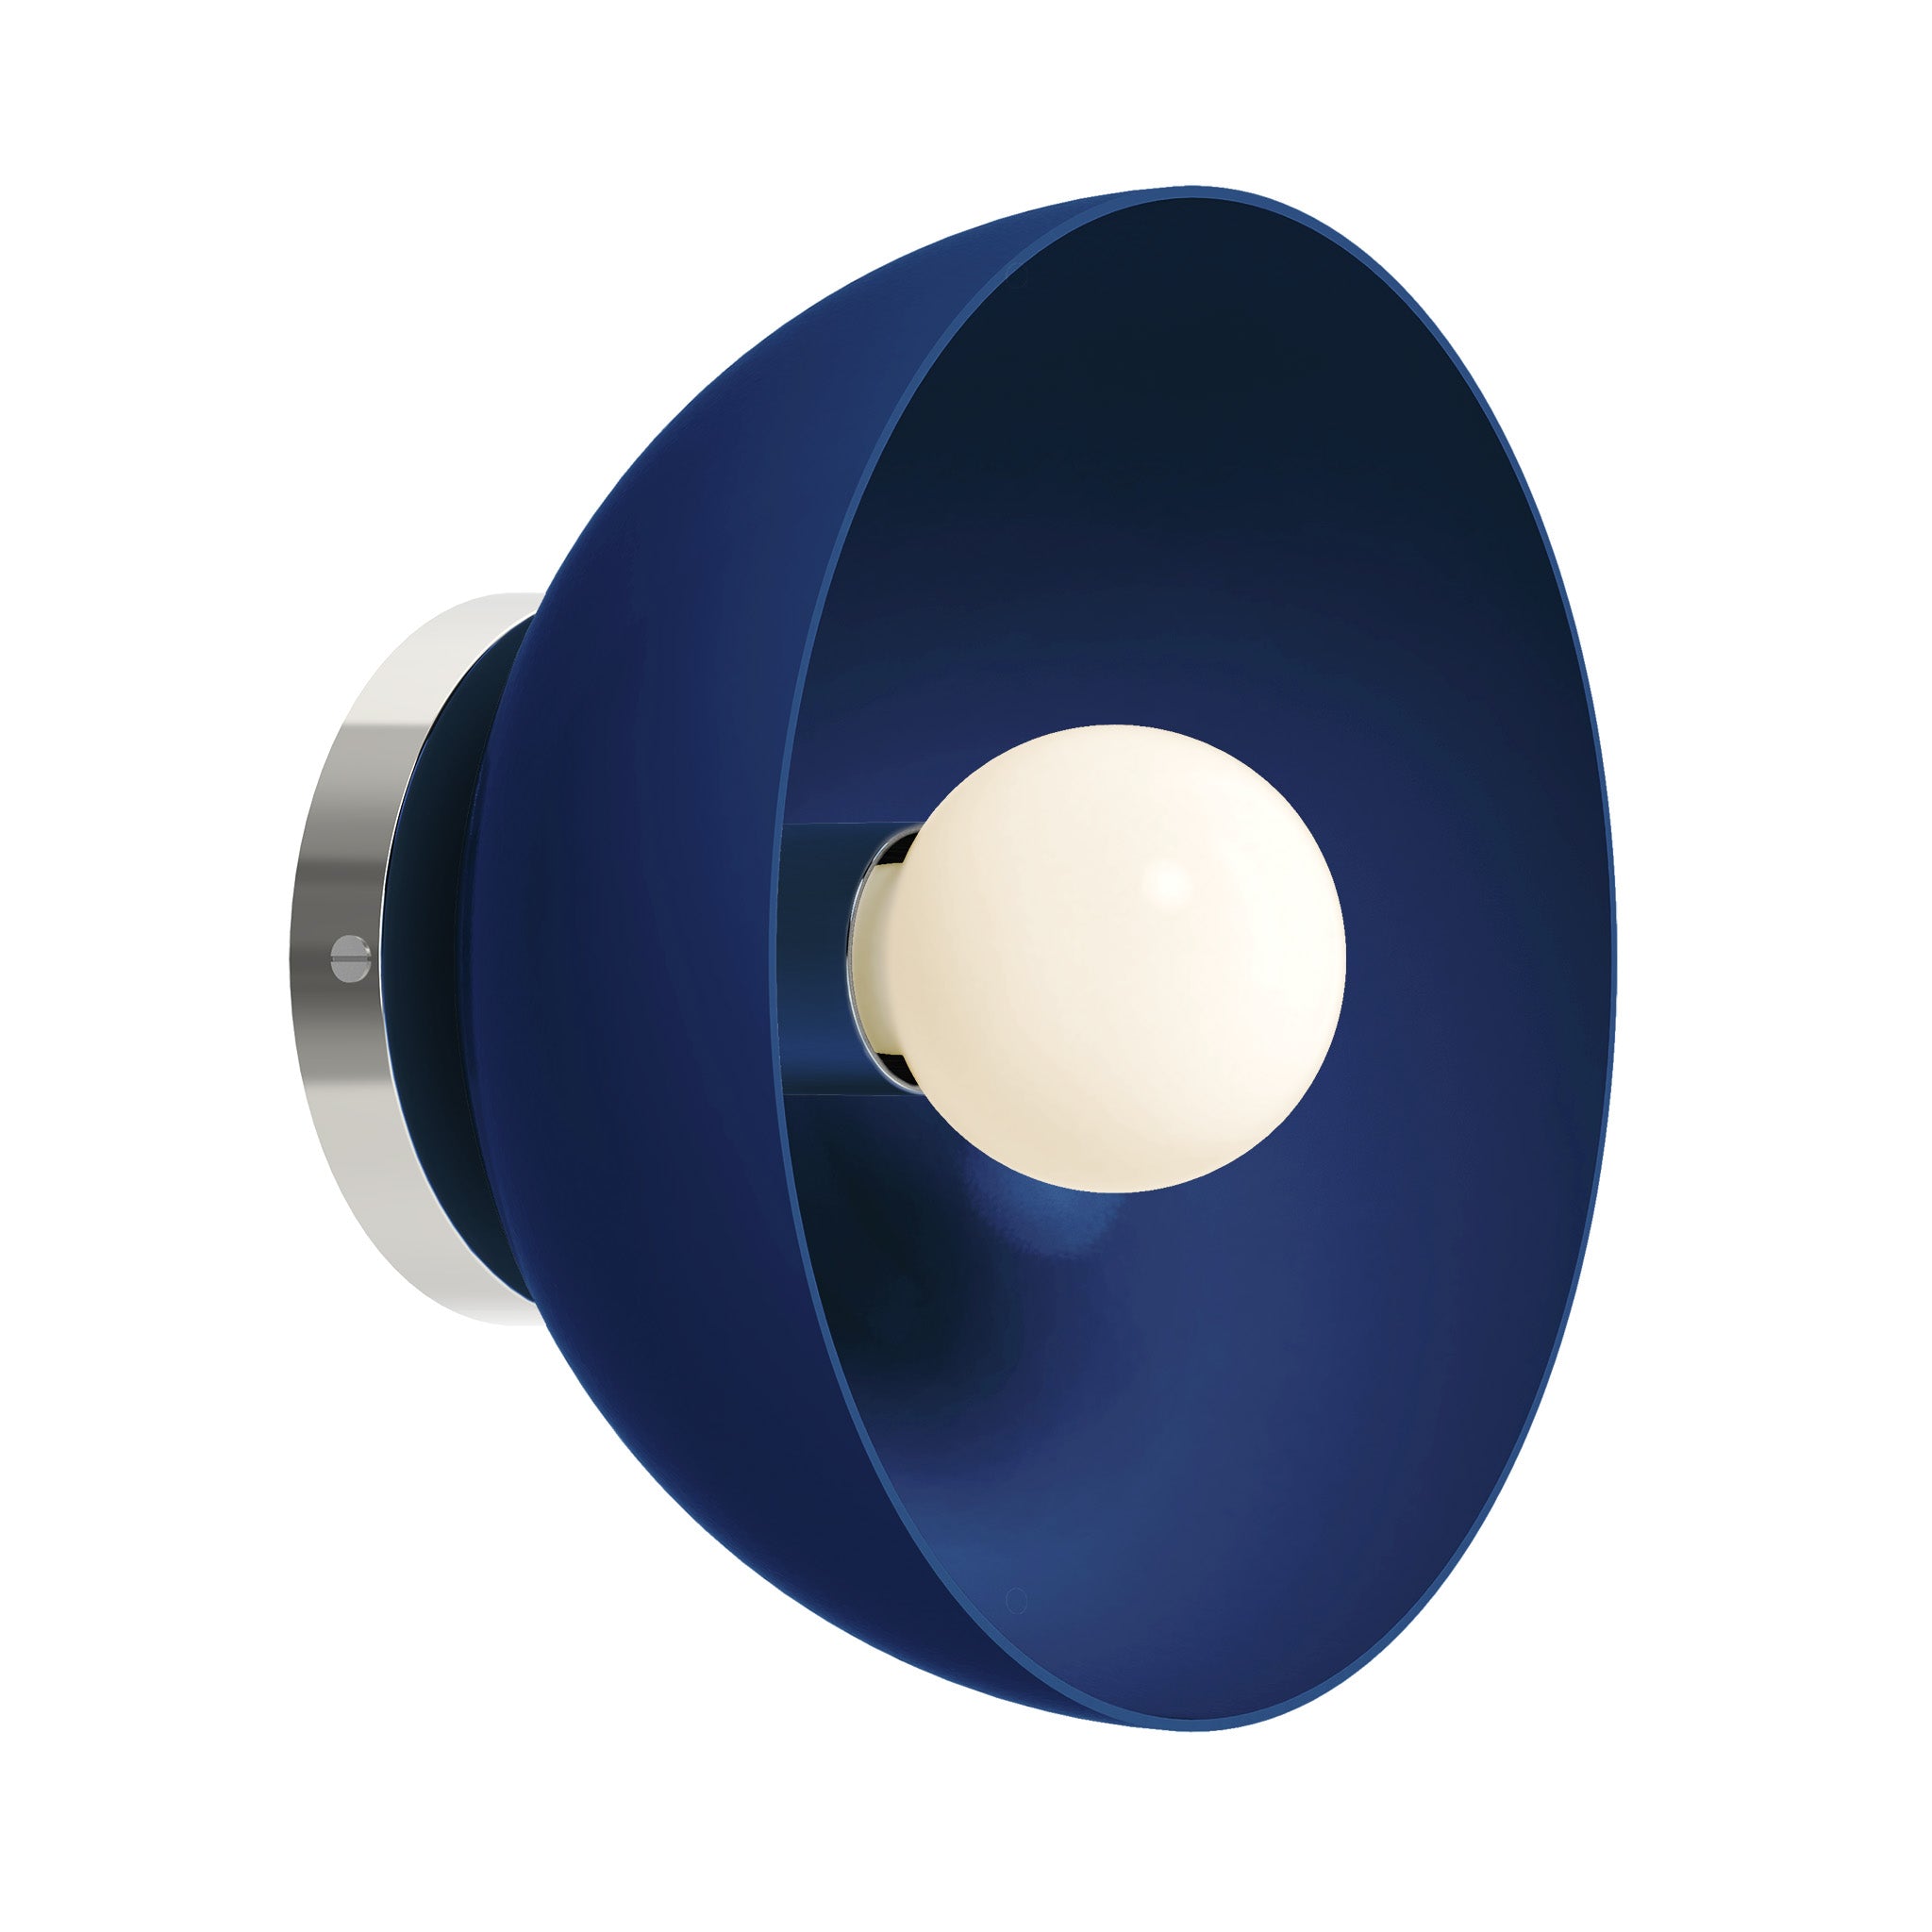 Nickel and cobalt color hemi dome sconce 10" Dutton Brown lighting